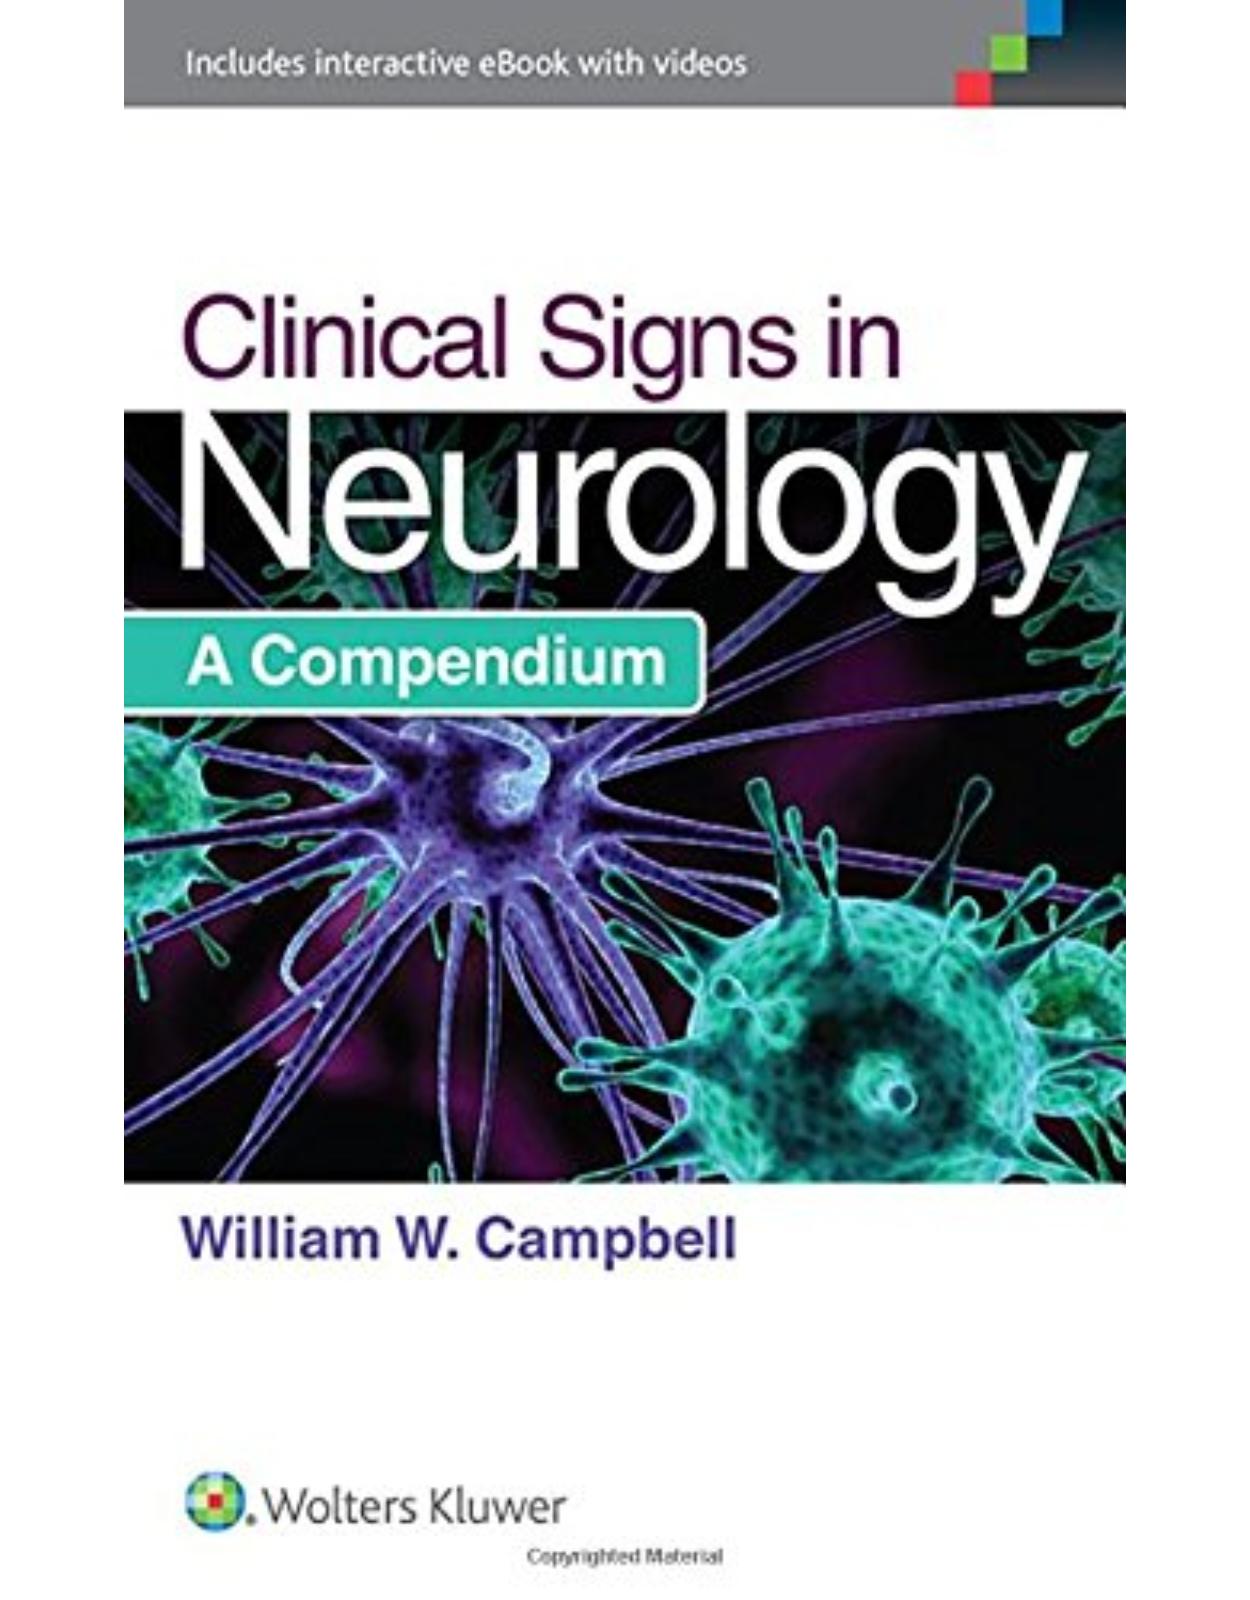 Clinical Signs in Neurology: A Compendium